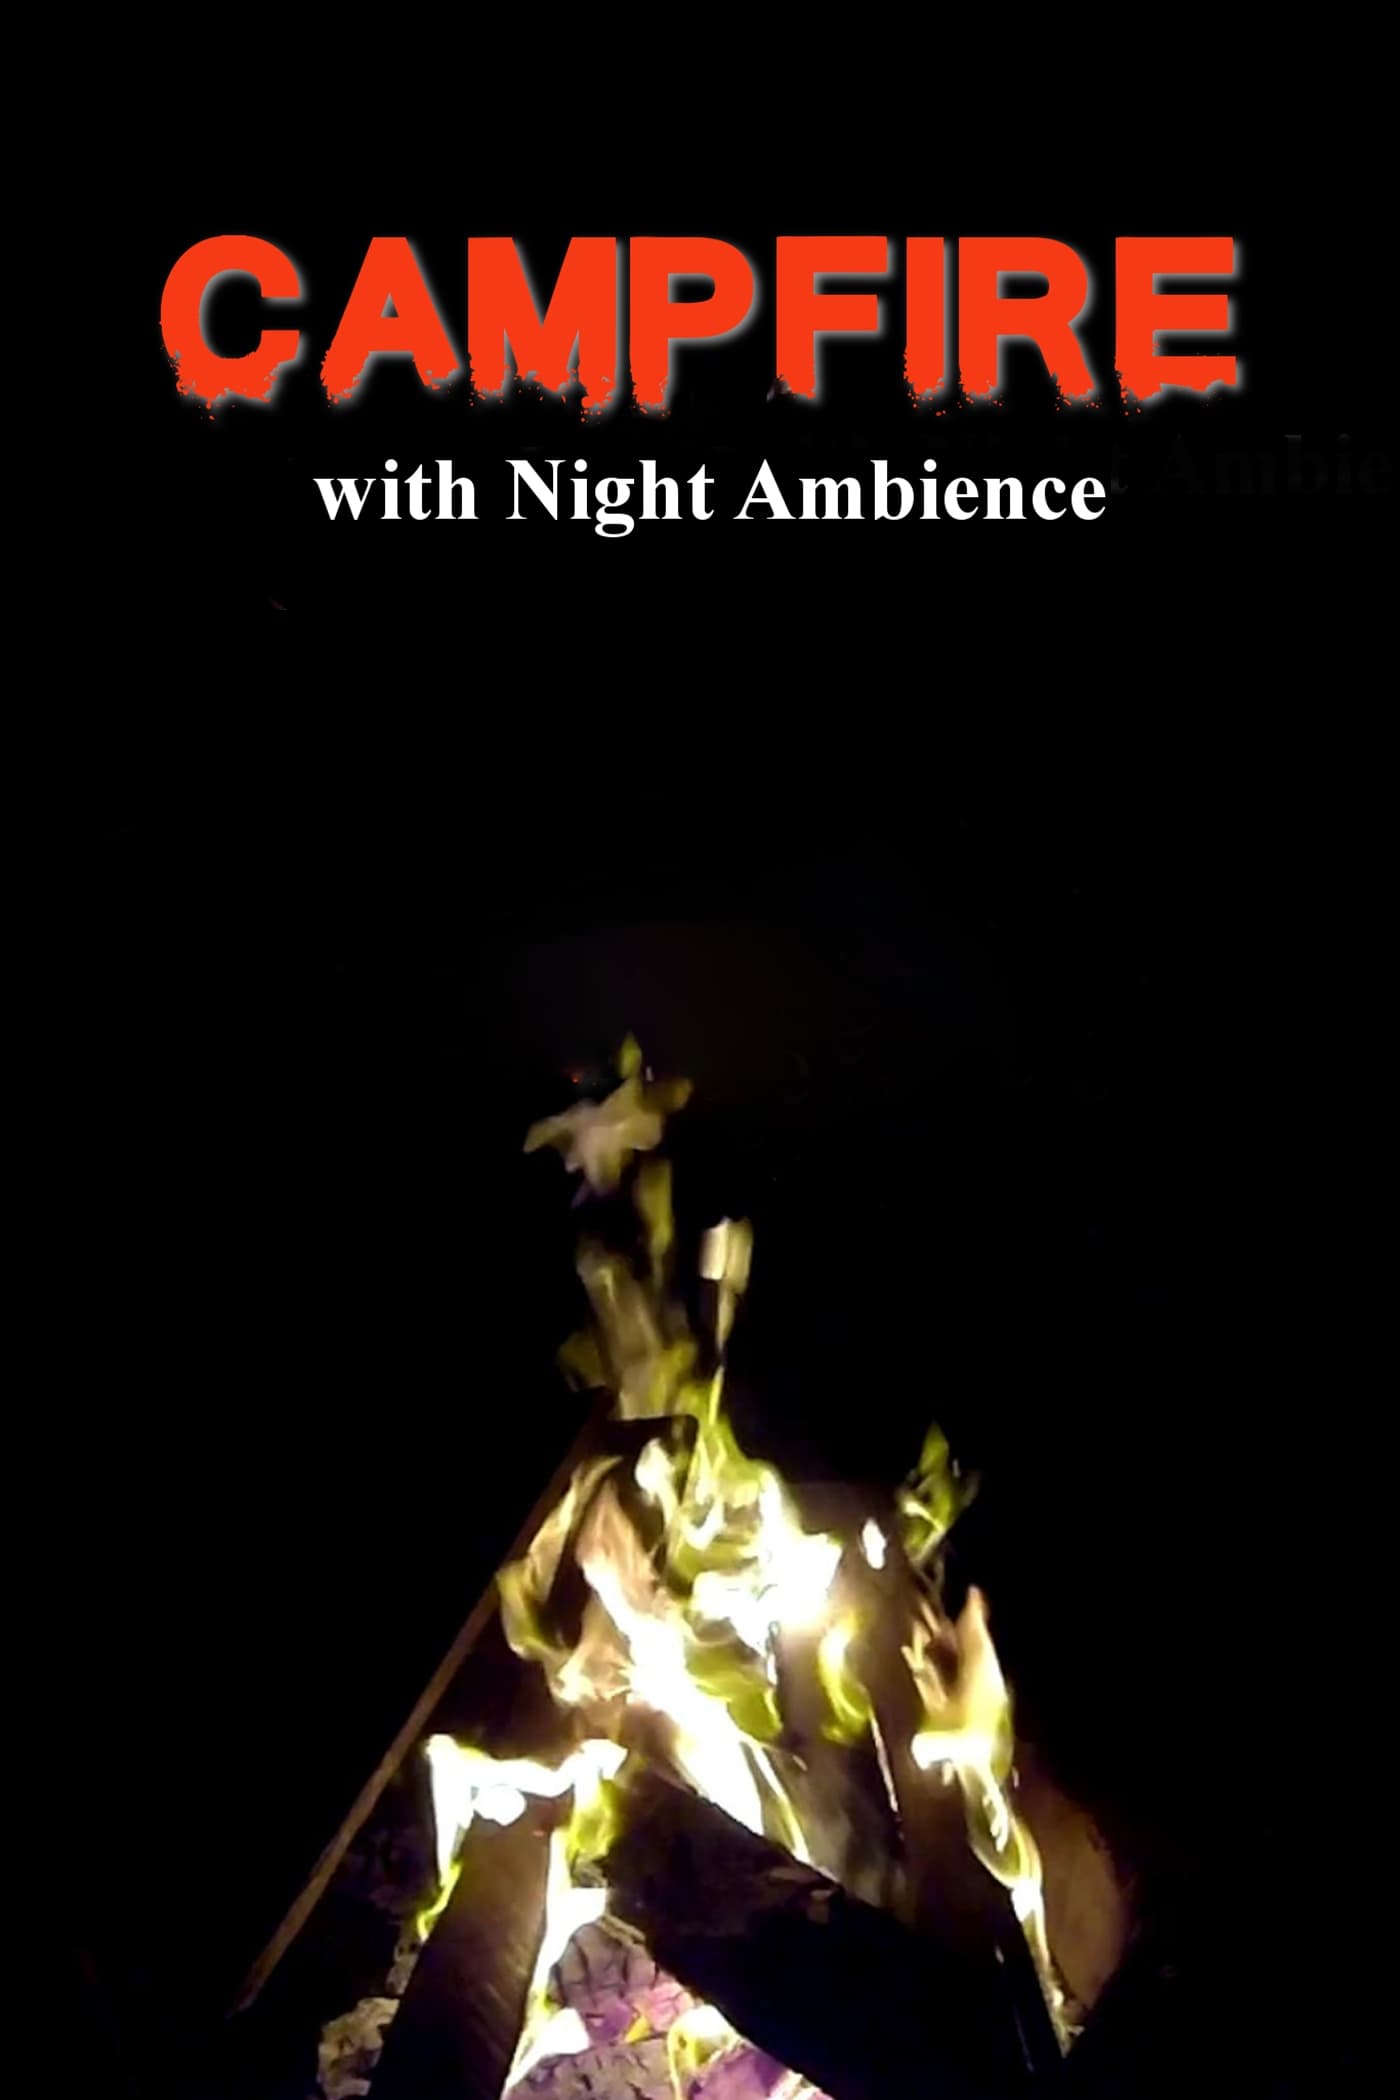 Campfire with Night Ambience